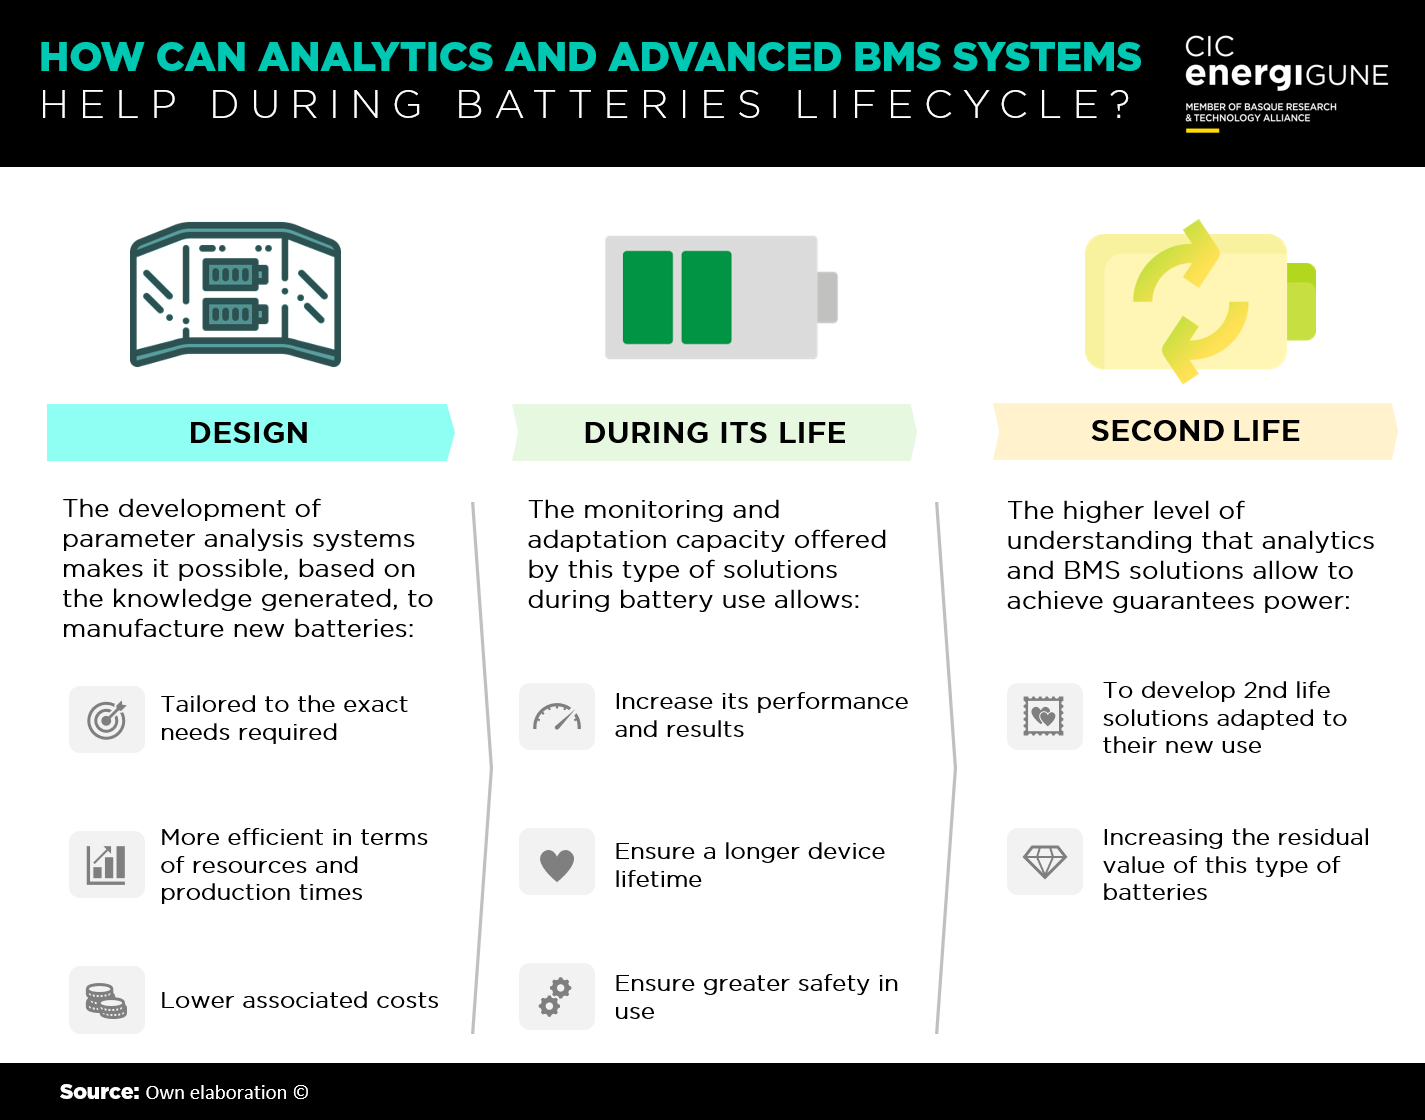 How can analytics and advanced bms systems help during batteries lifecycle? While designing it, during its lifespan, and during its second life.